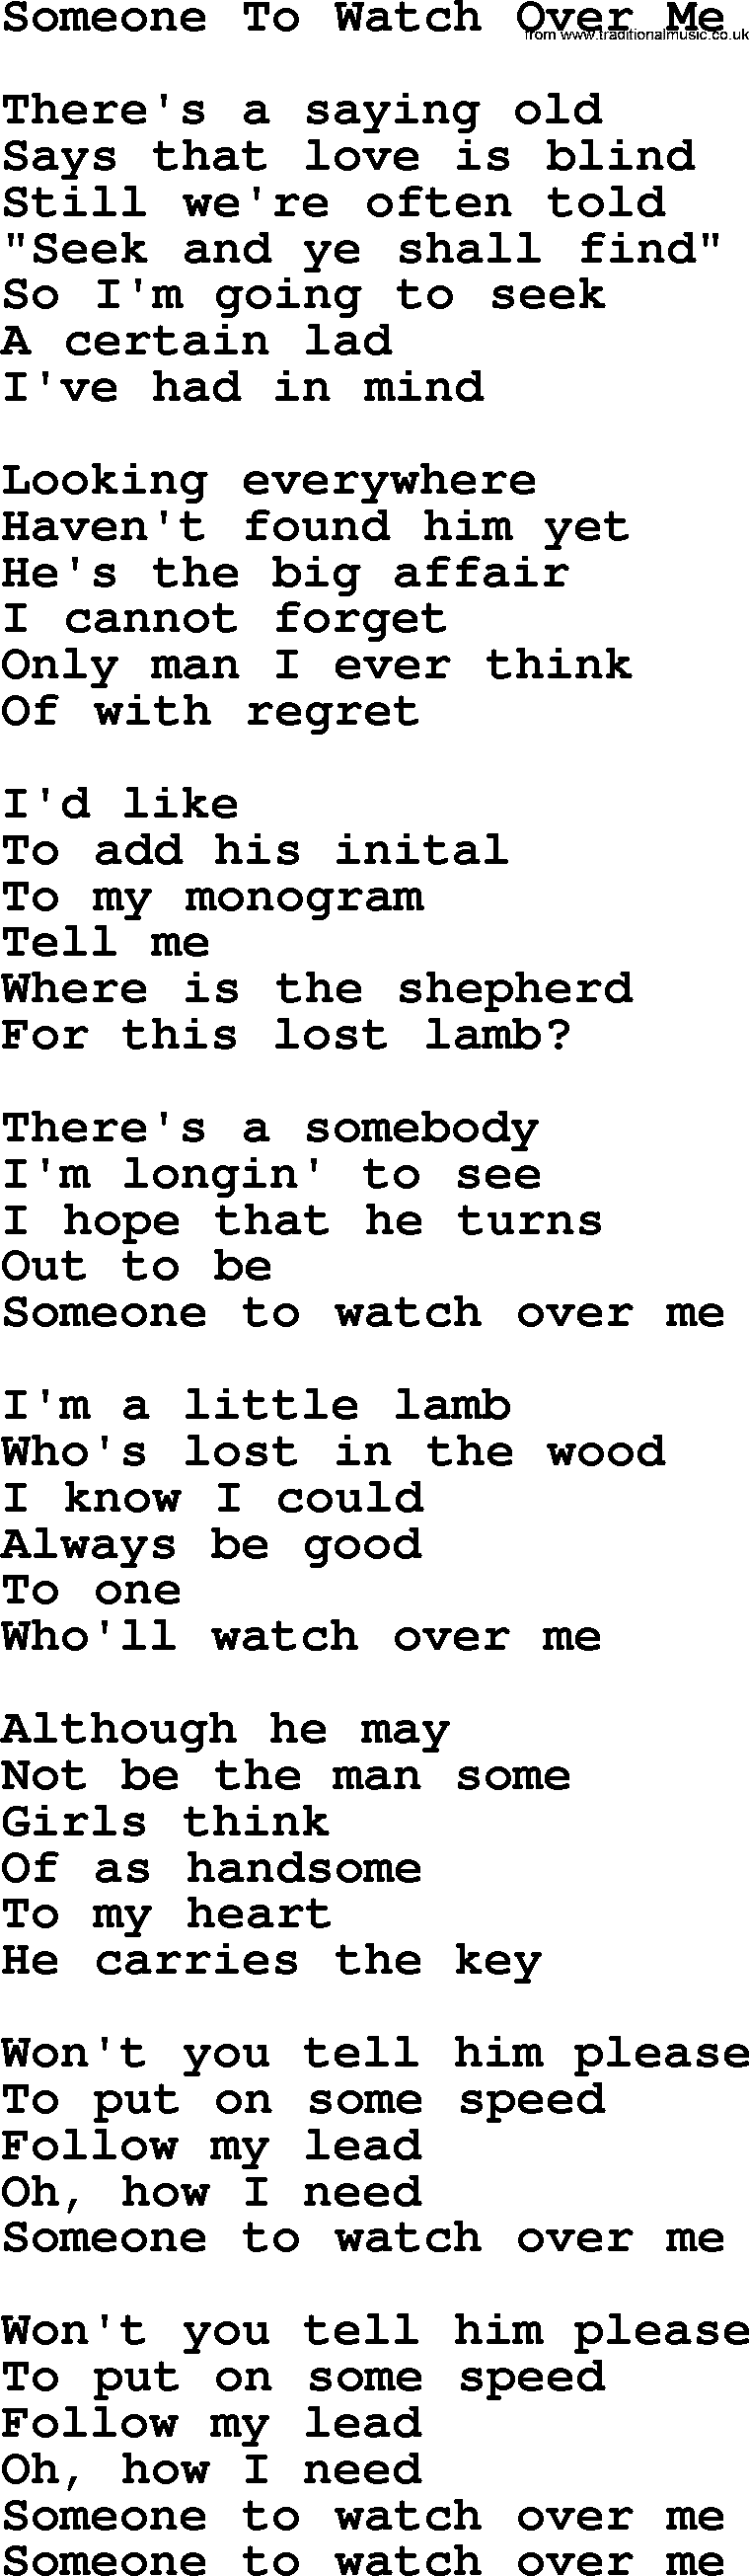 Dolly Parton song Someone To Watch Over Me.txt lyrics